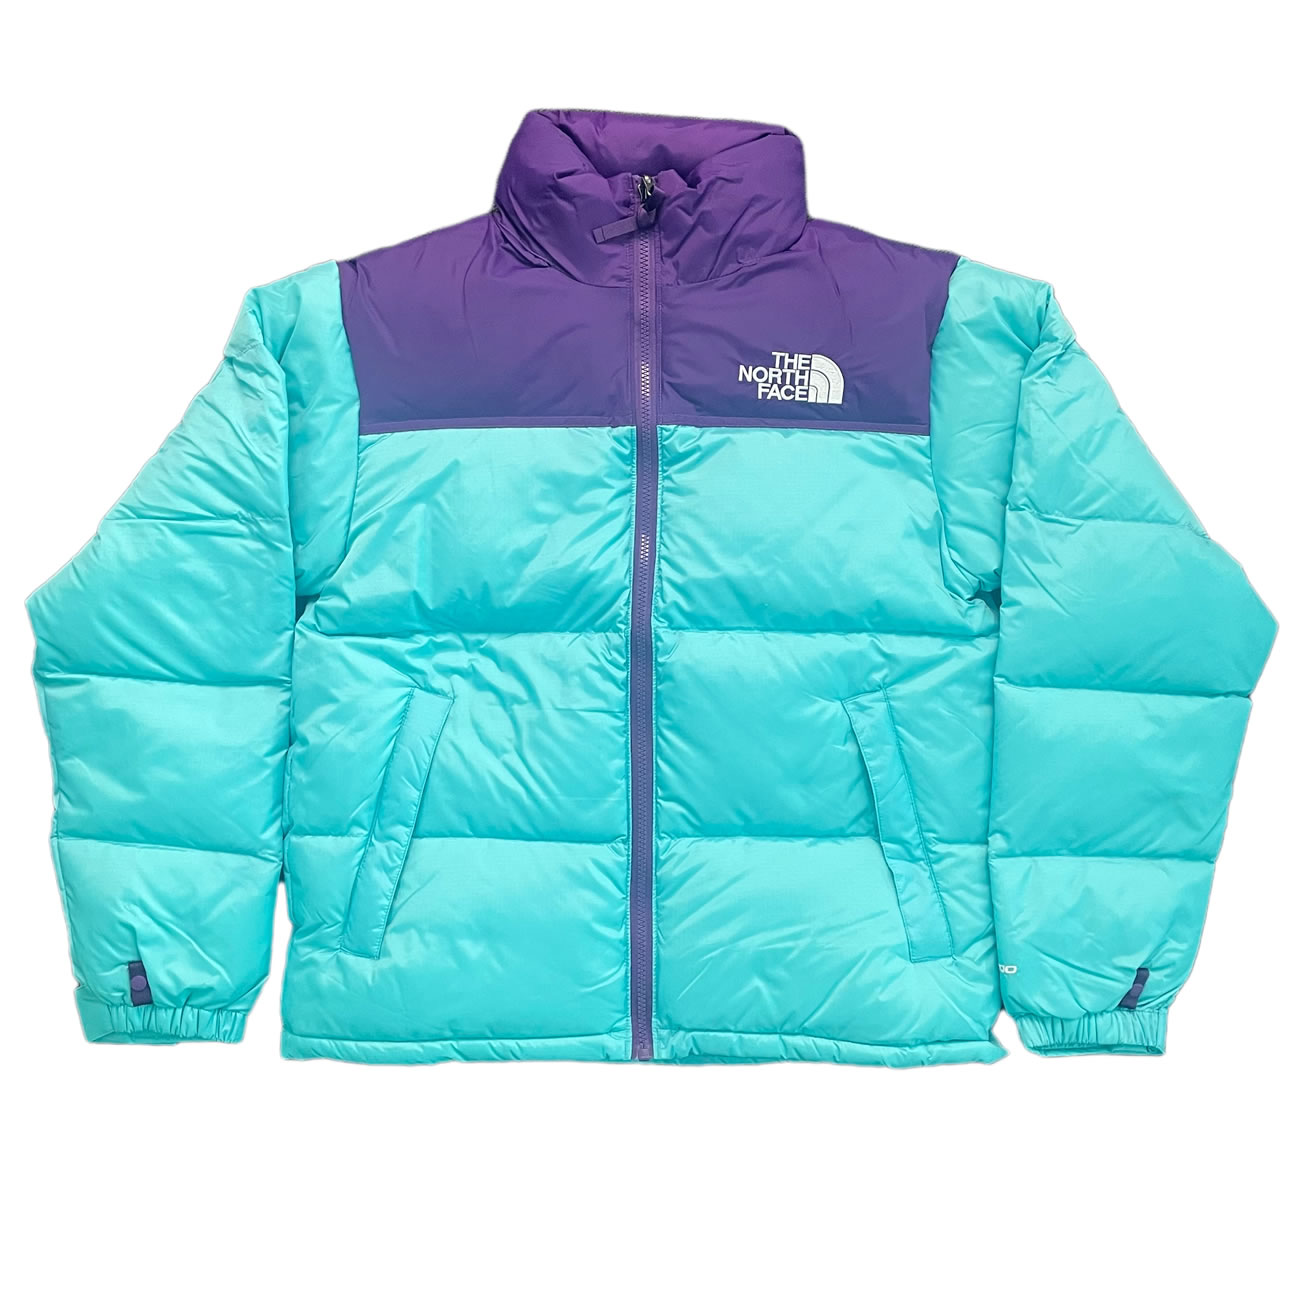 The North Face 1996 Retro Nuptse Packable Jacket Fw21 (11) - newkick.org